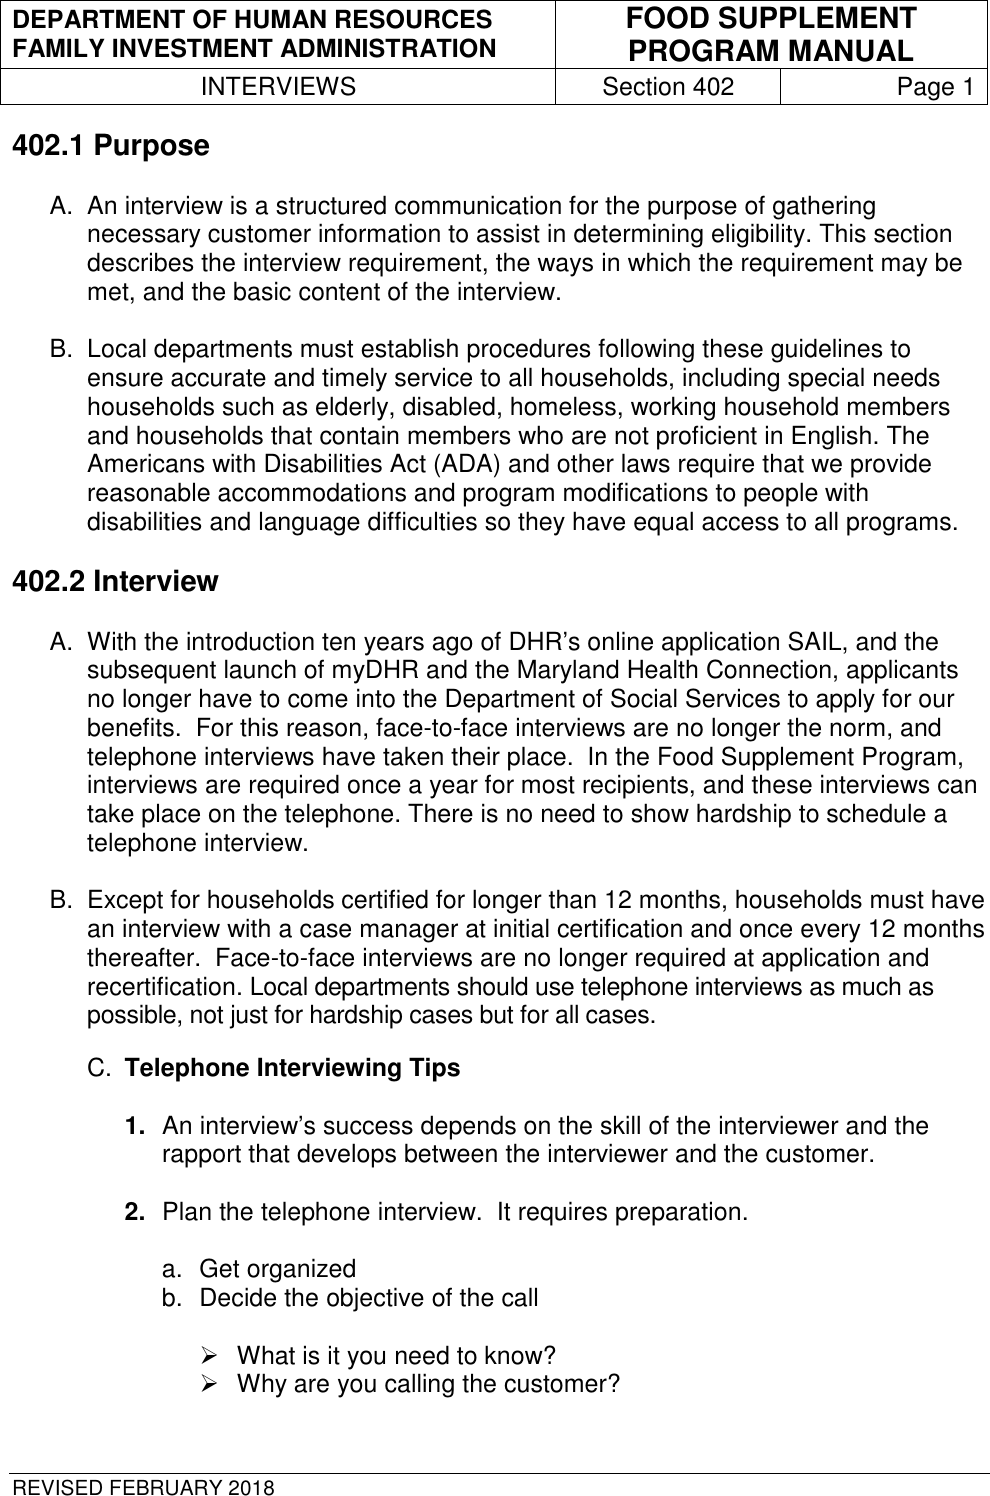 Page 1 of 8 - 402 402-Interviews-rev-2-28-18